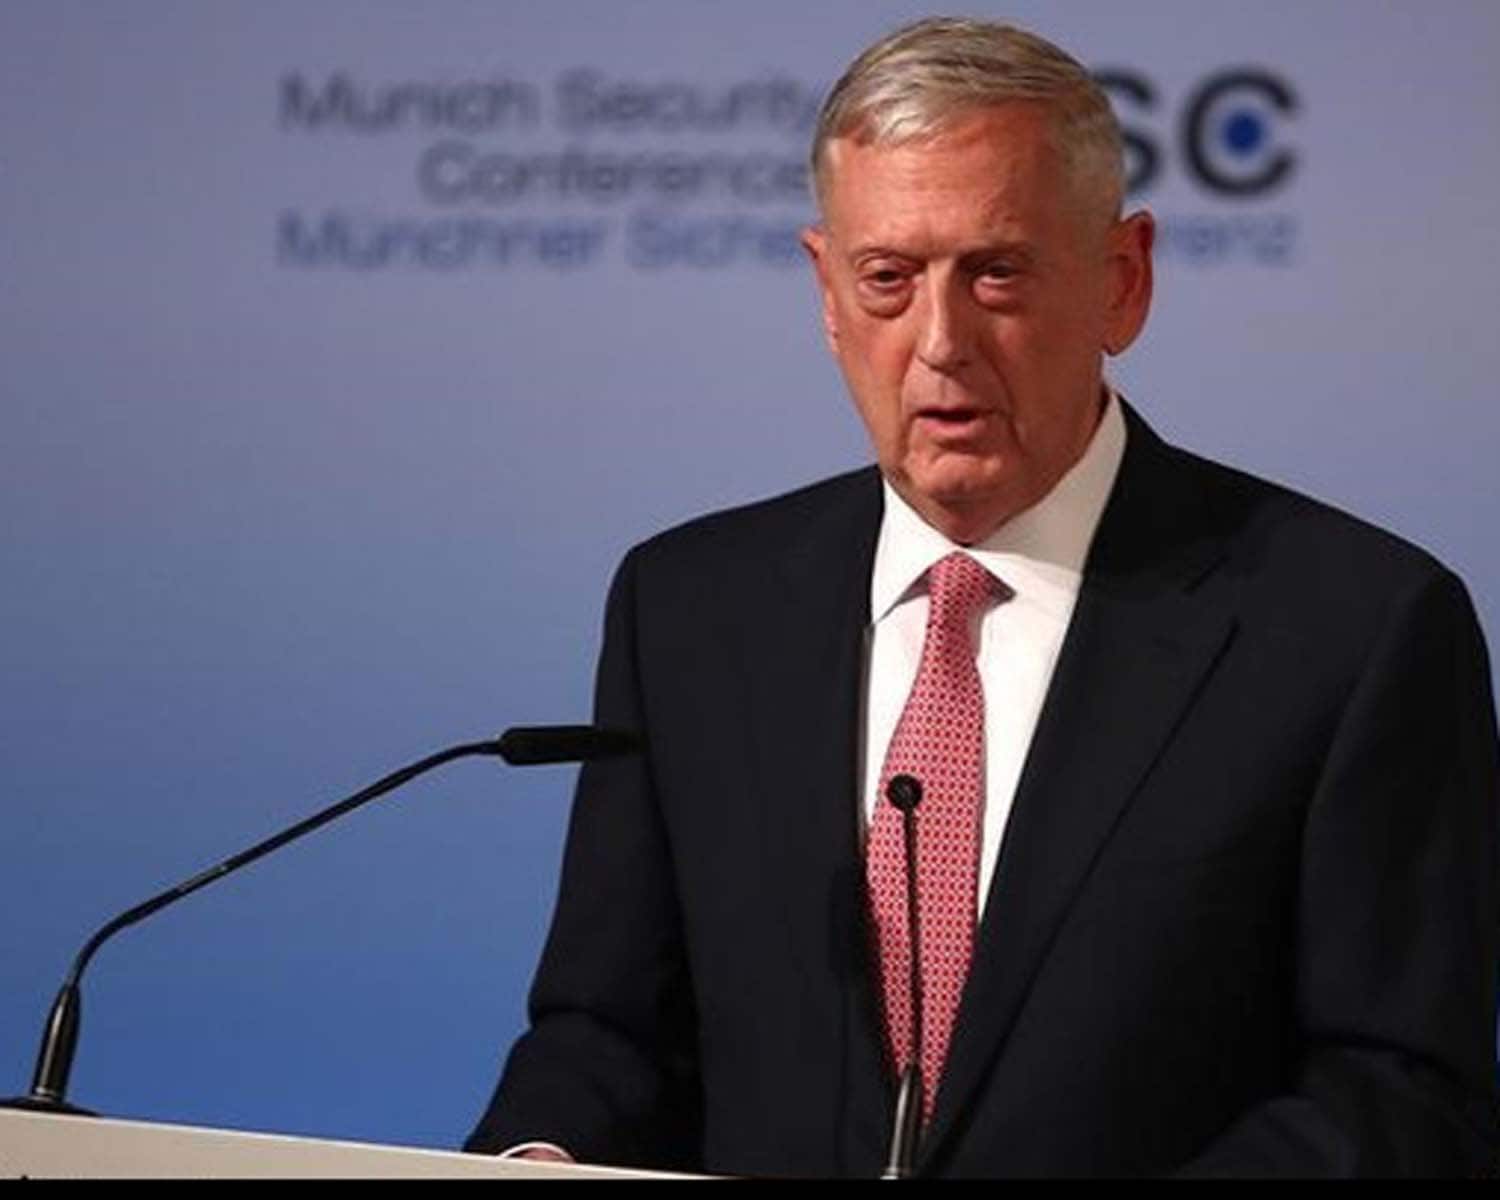 Mattis warns of Chinese &#039;intimidation&#039;; says US seeks &#039;results-oriented&#039; ties